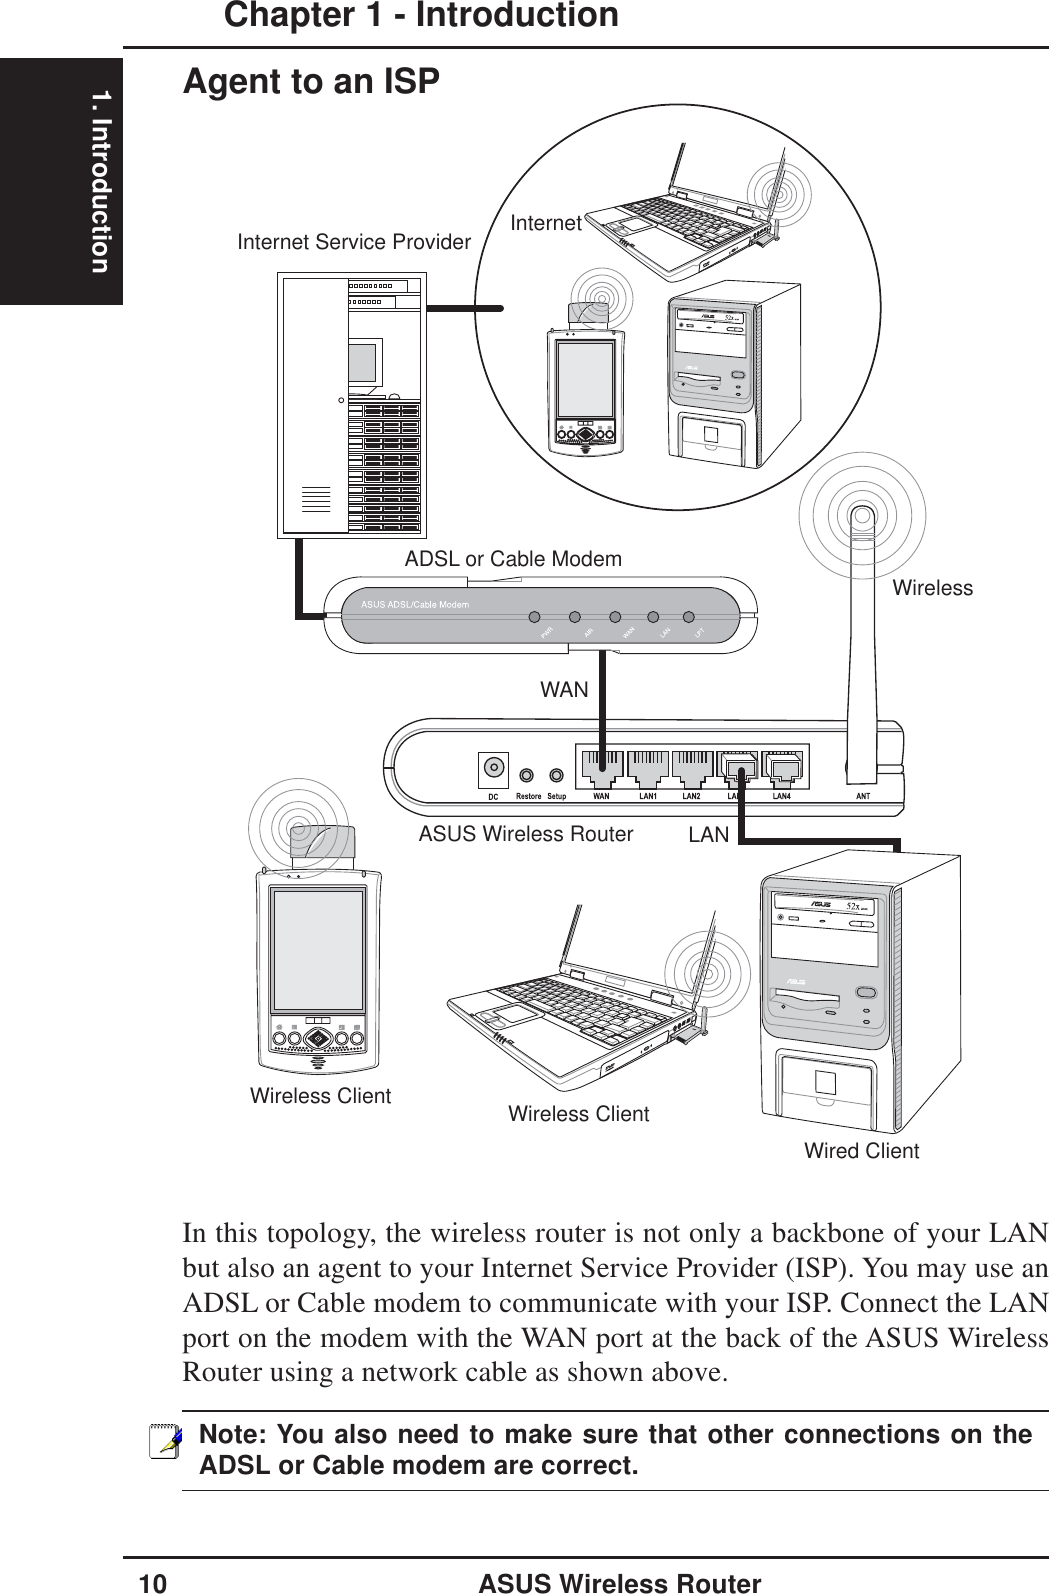 1. IntroductionChapter 1 - Introduction10 ASUS Wireless RouterWirelessASUS Wireless RouterInternet Service ProviderWired ClientWireless ClientWireless ClientWANLANADSL or Cable ModemInternetAgent to an ISPIn this topology, the wireless router is not only a backbone of your LANbut also an agent to your Internet Service Provider (ISP). You may use anADSL or Cable modem to communicate with your ISP. Connect the LANport on the modem with the WAN port at the back of the ASUS WirelessRouter using a network cable as shown above.Note: You also need to make sure that other connections on theADSL or Cable modem are correct.